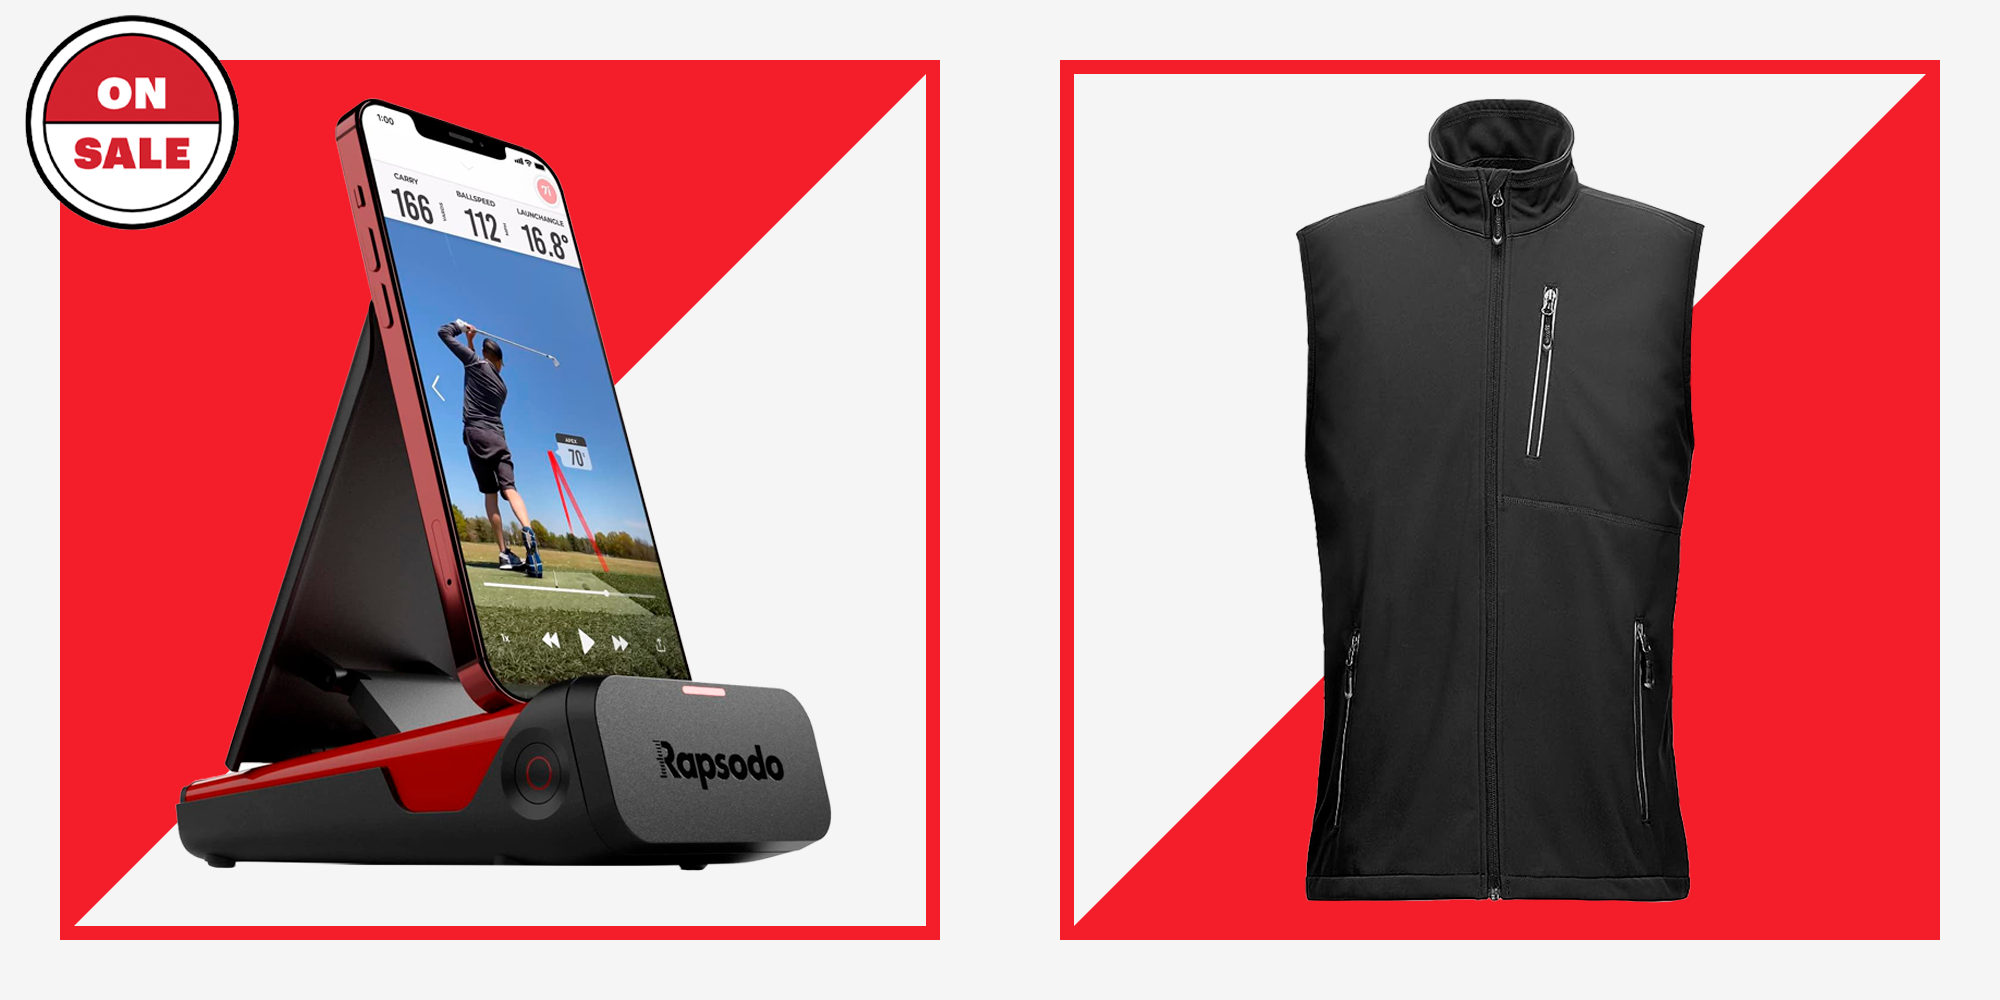 Save on Golf Gear to Keep Your Season Going - Exclusive Deals at